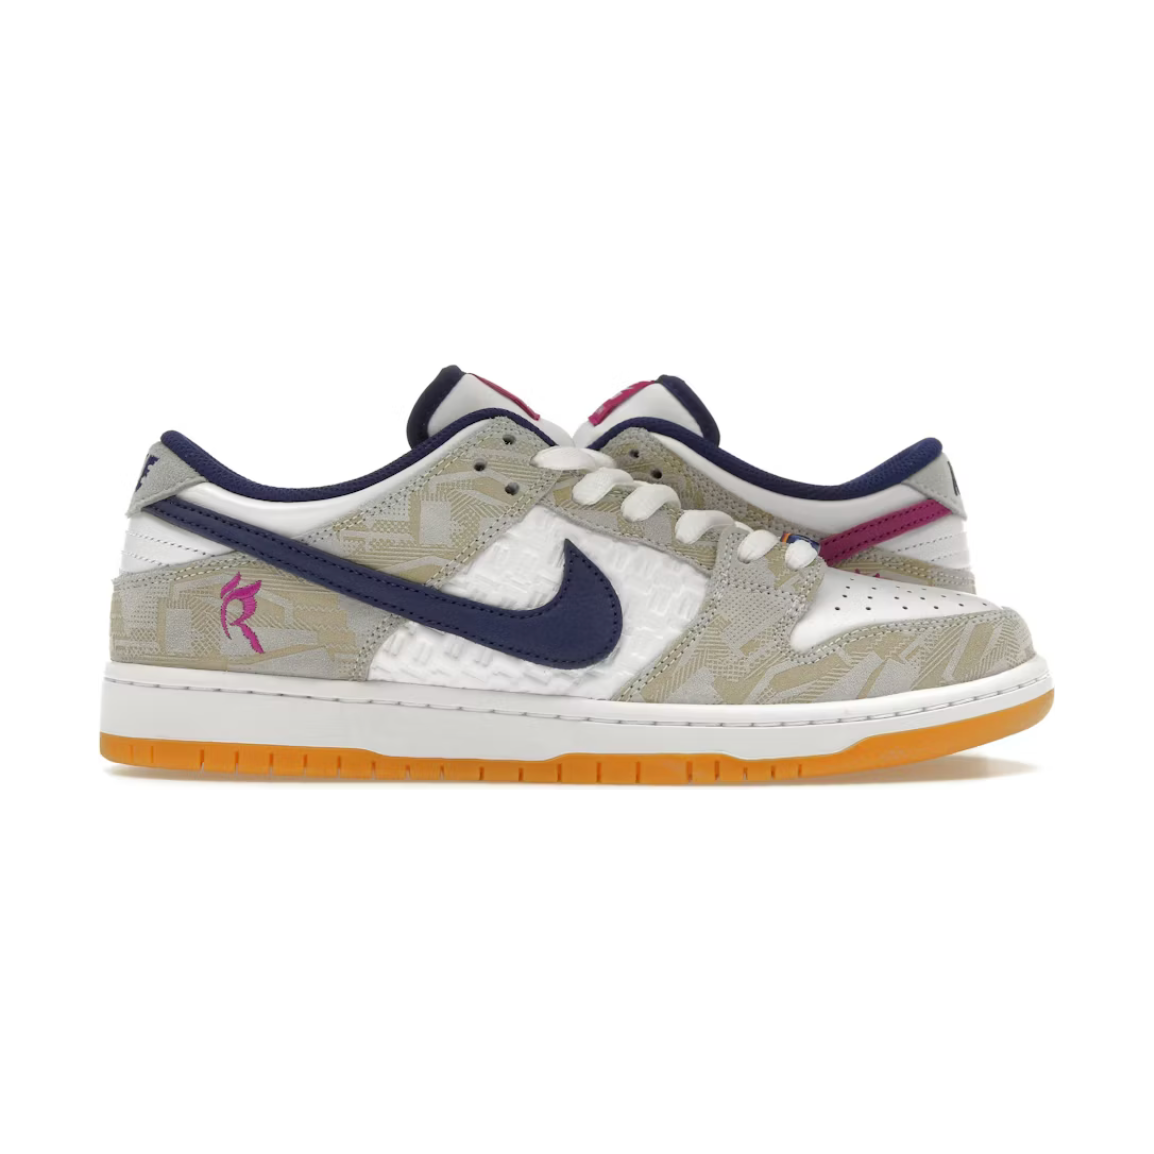 Nike SB Dunk Low Rayssa Leal by Nike from £195.00